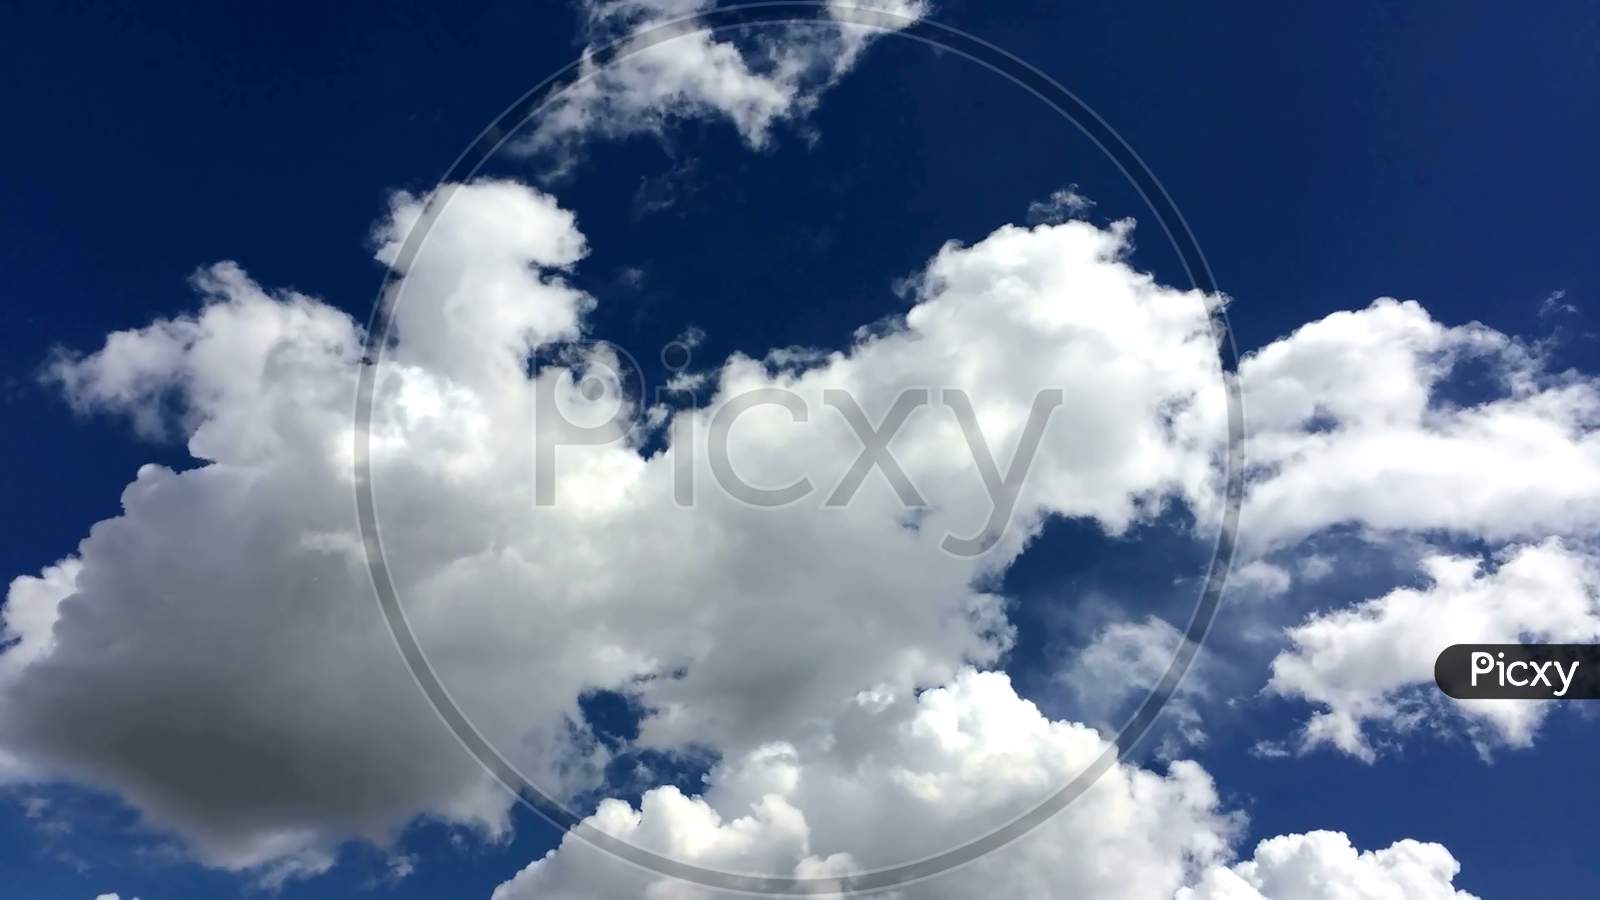 Blue Sky With Cloud In The Daytime